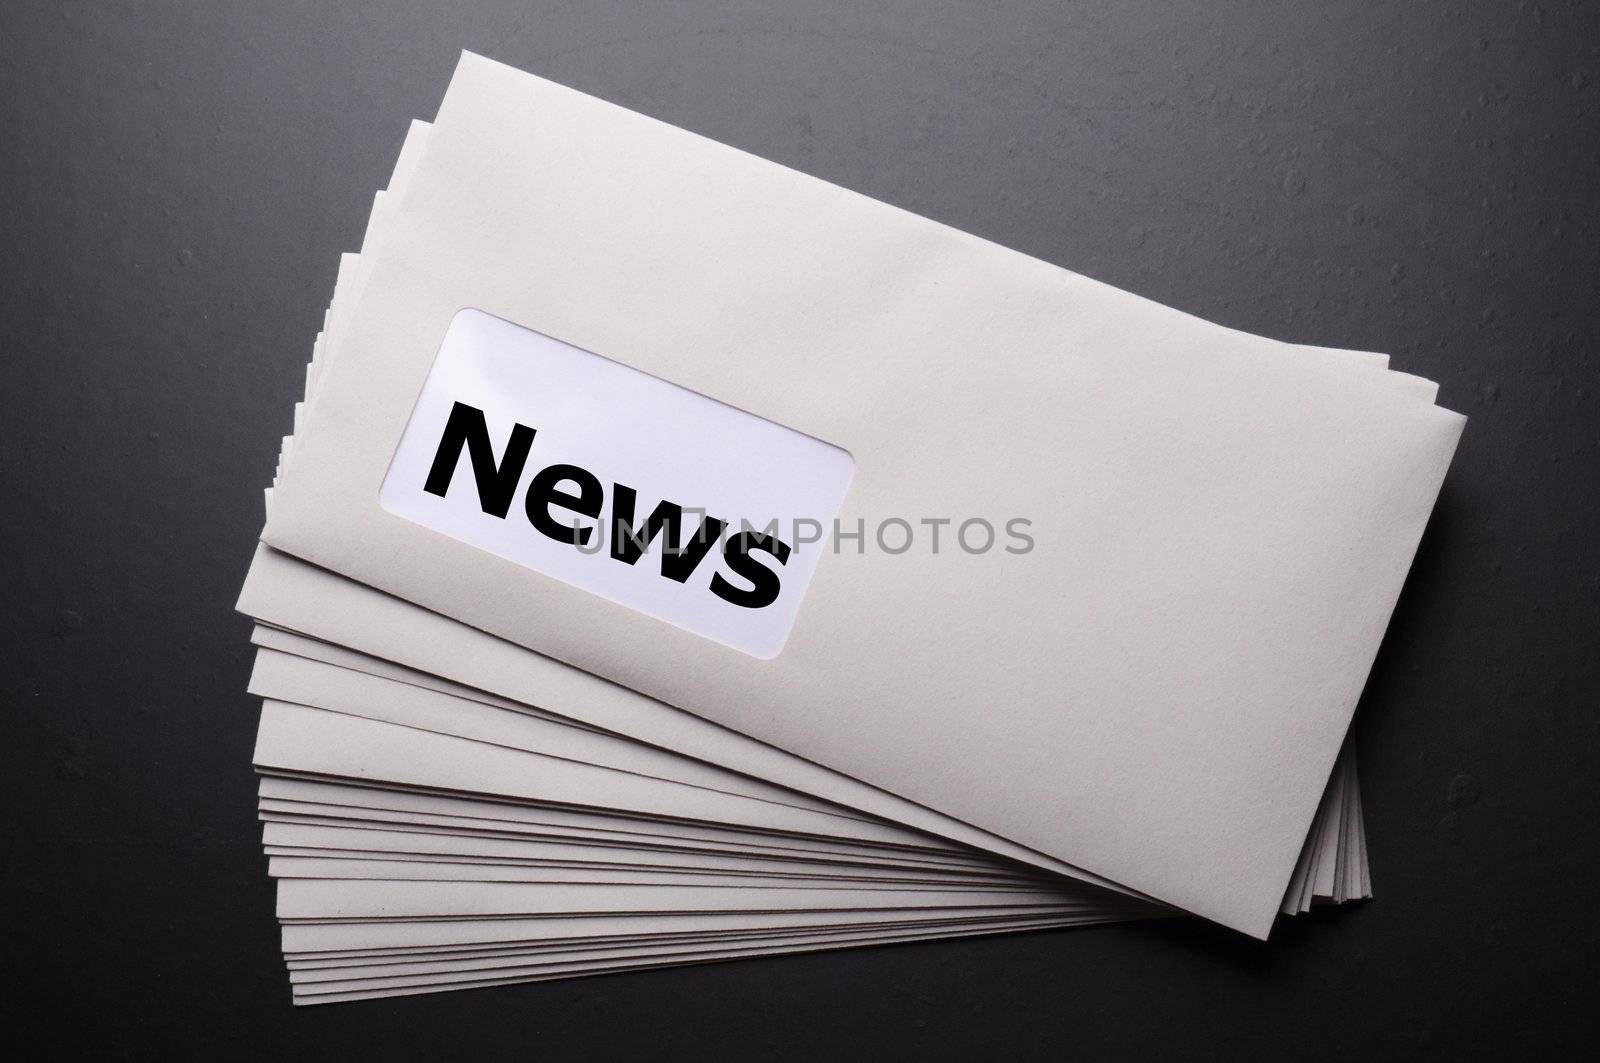 new or newsletter concept with envelope and word